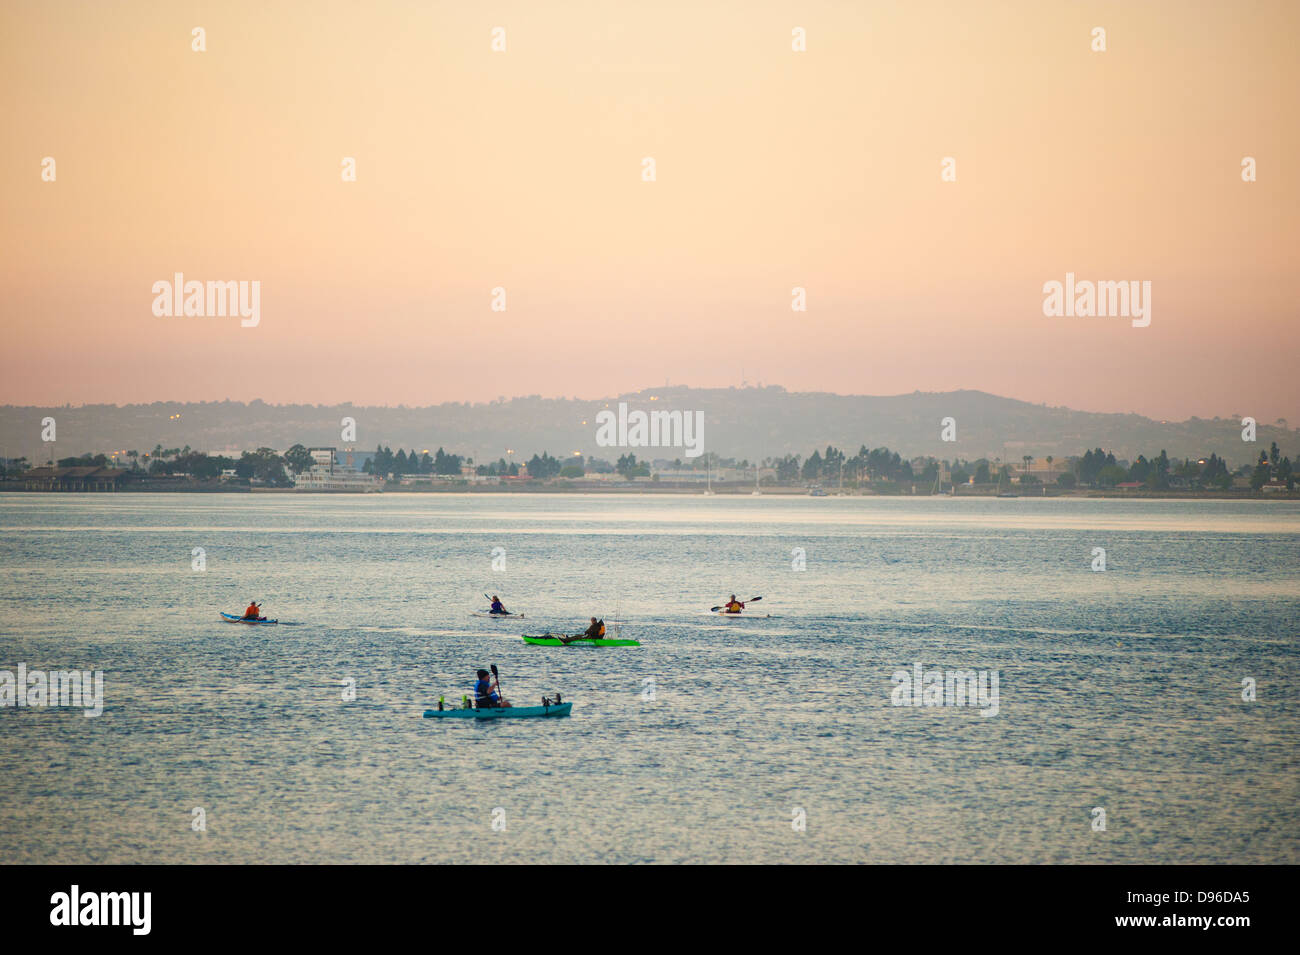 Kayakers in San Diego Bay, San Diego, California, United States of America Stock Photo